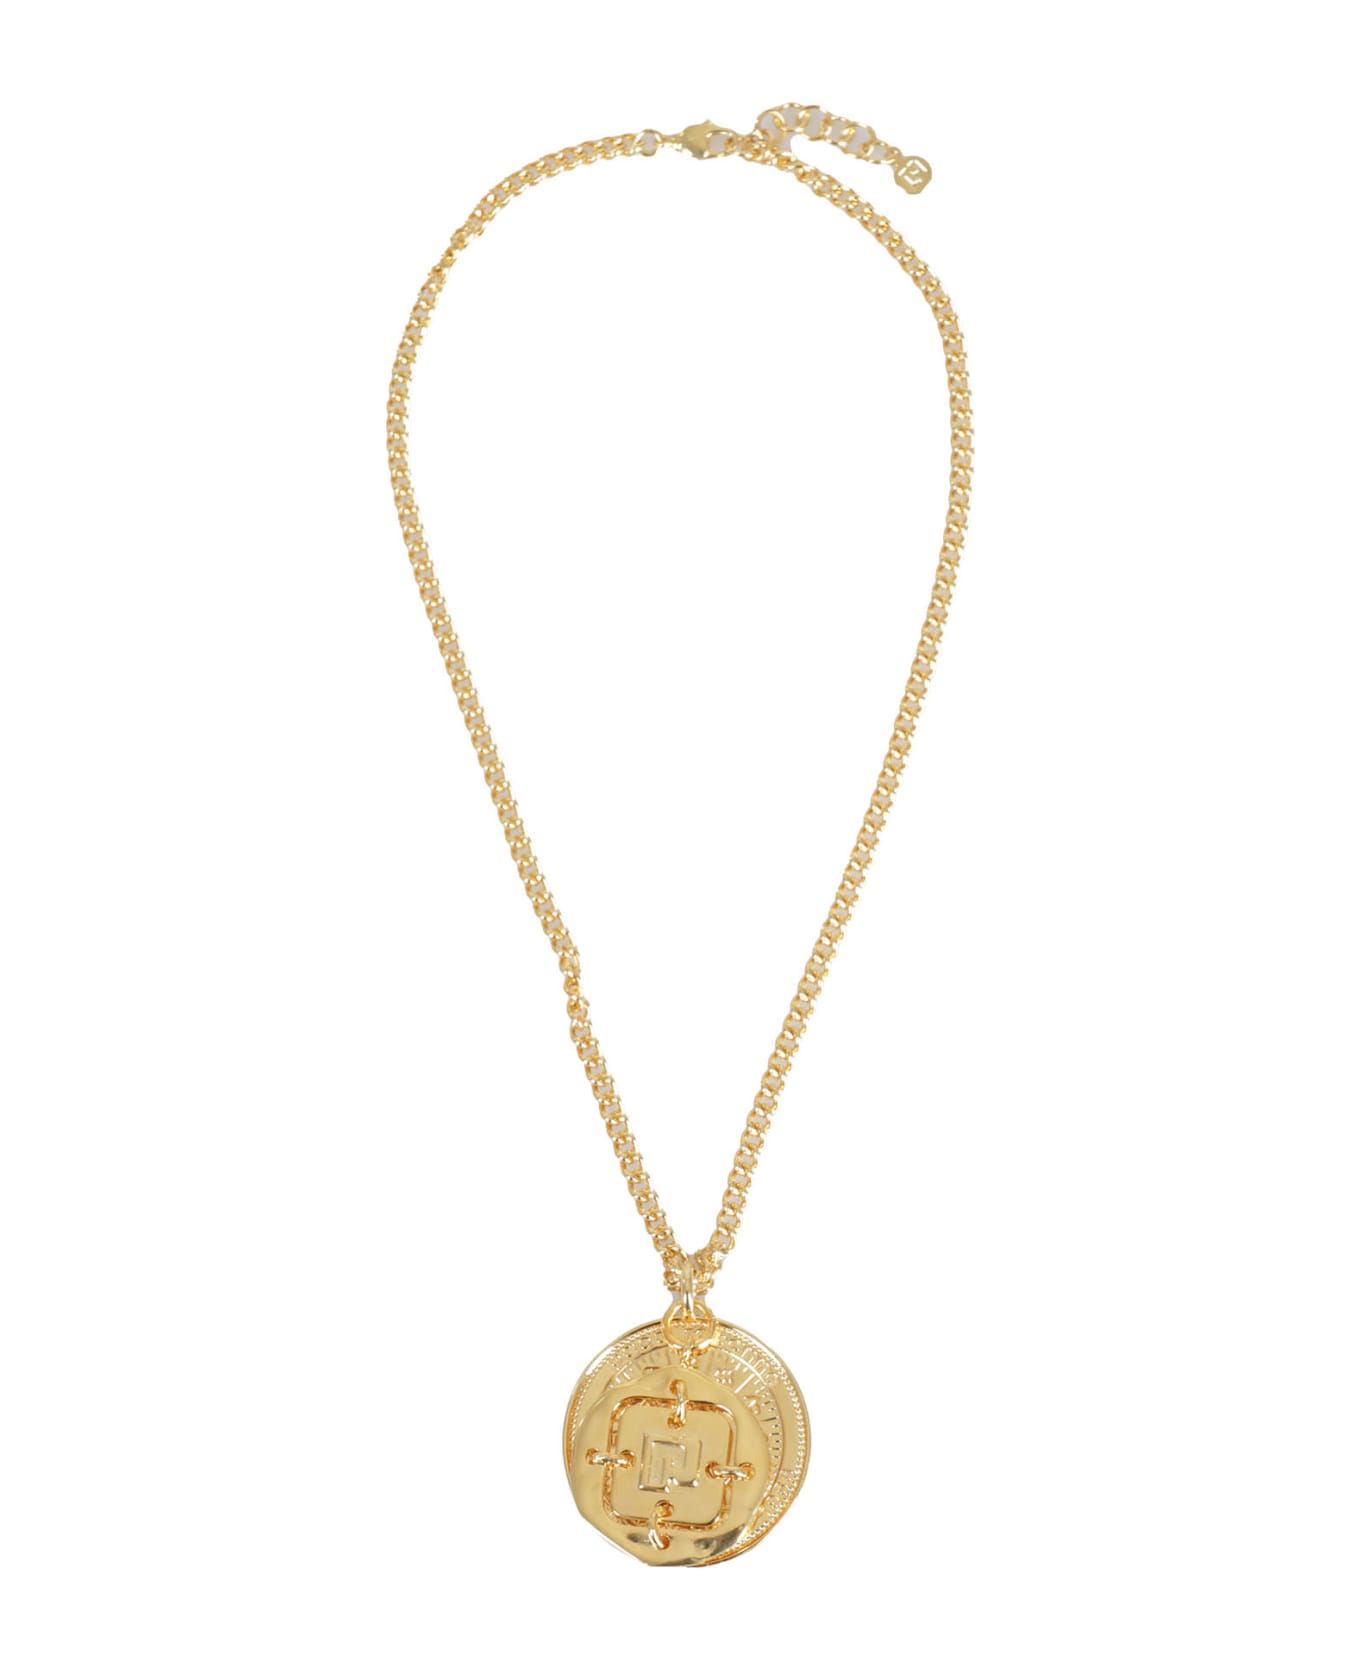 Paco Rabanne Long Necklace - Gold ネックレス